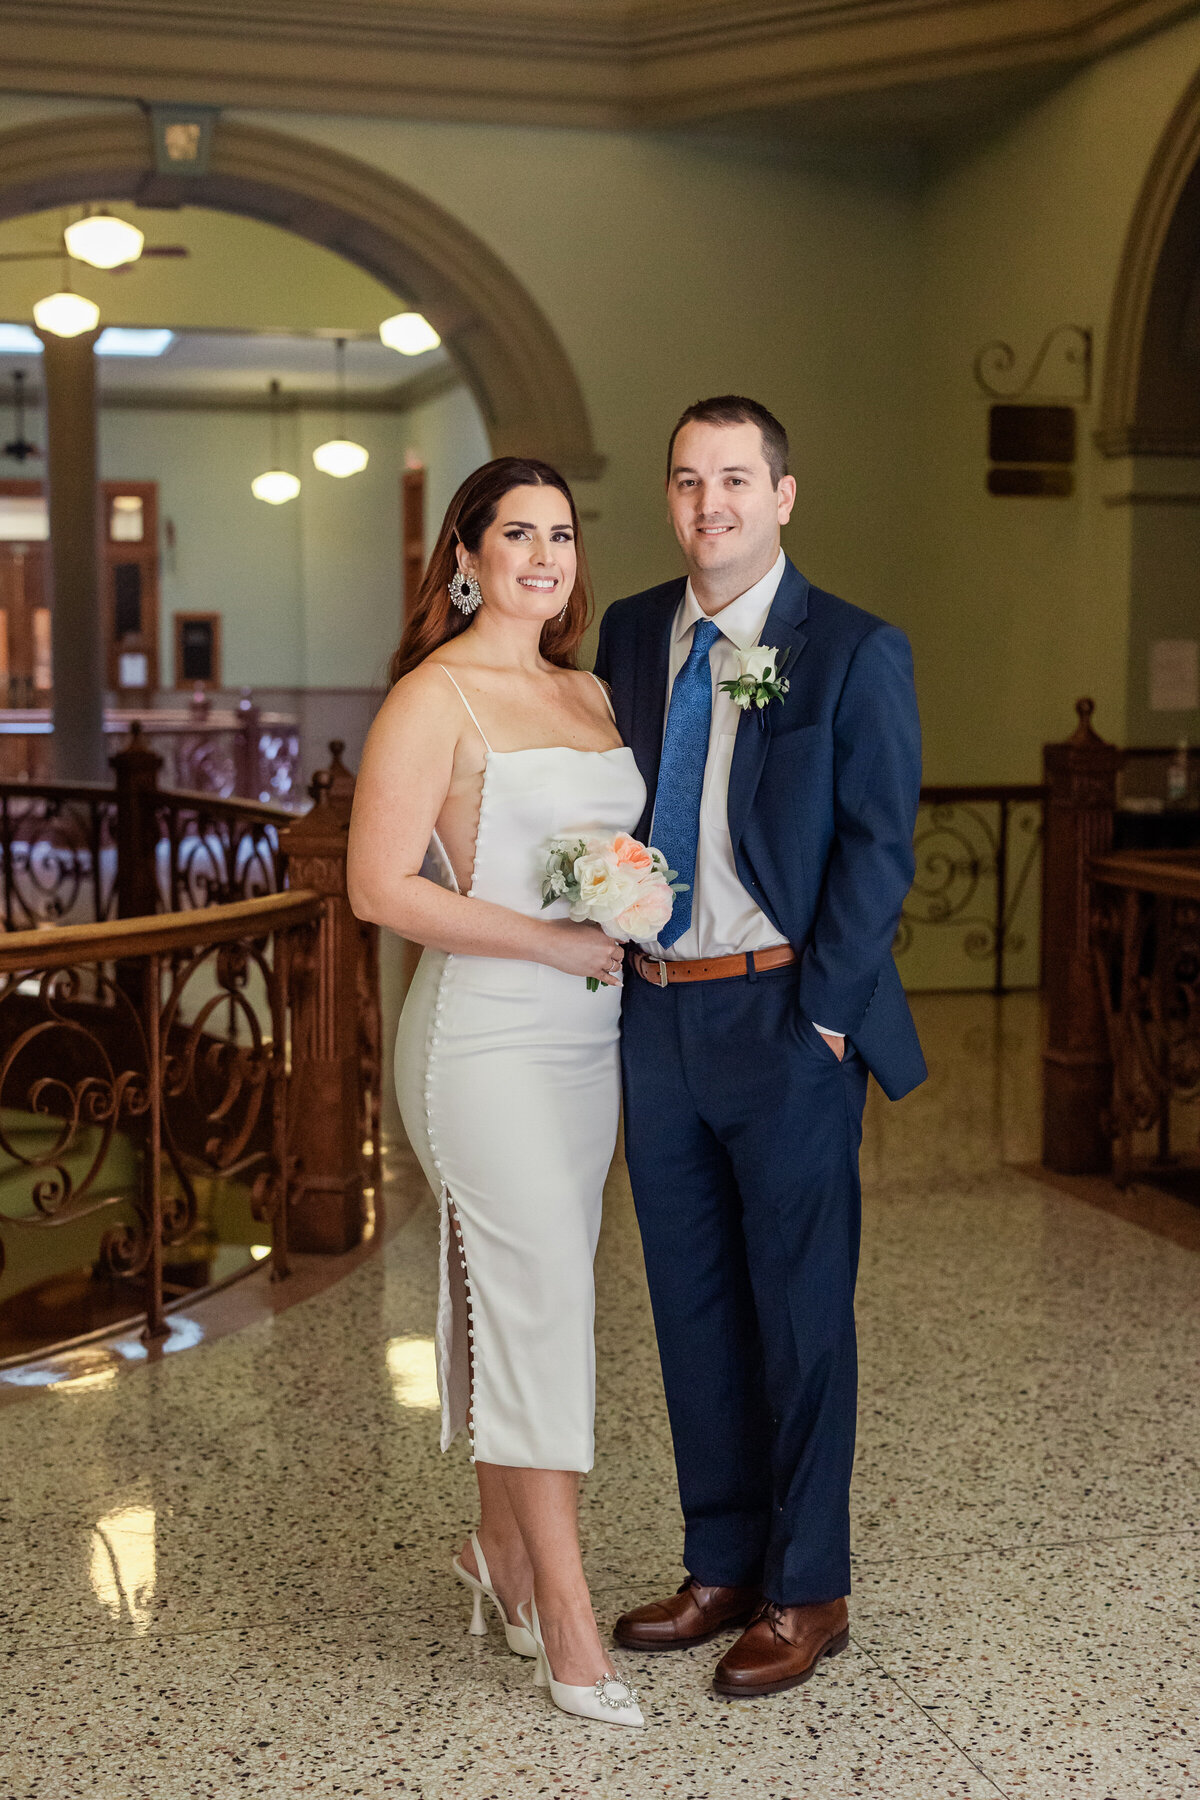 Portrait of a bride and groom after their elopement ceremony at the Tarrant County Courthouse in Fort Worth, Texas. The bride is on the left and is wearing a simple yet stylish white dress and is holding a bouquet. The groom is on the right an dis wearing a navy suit with a boutonniere.